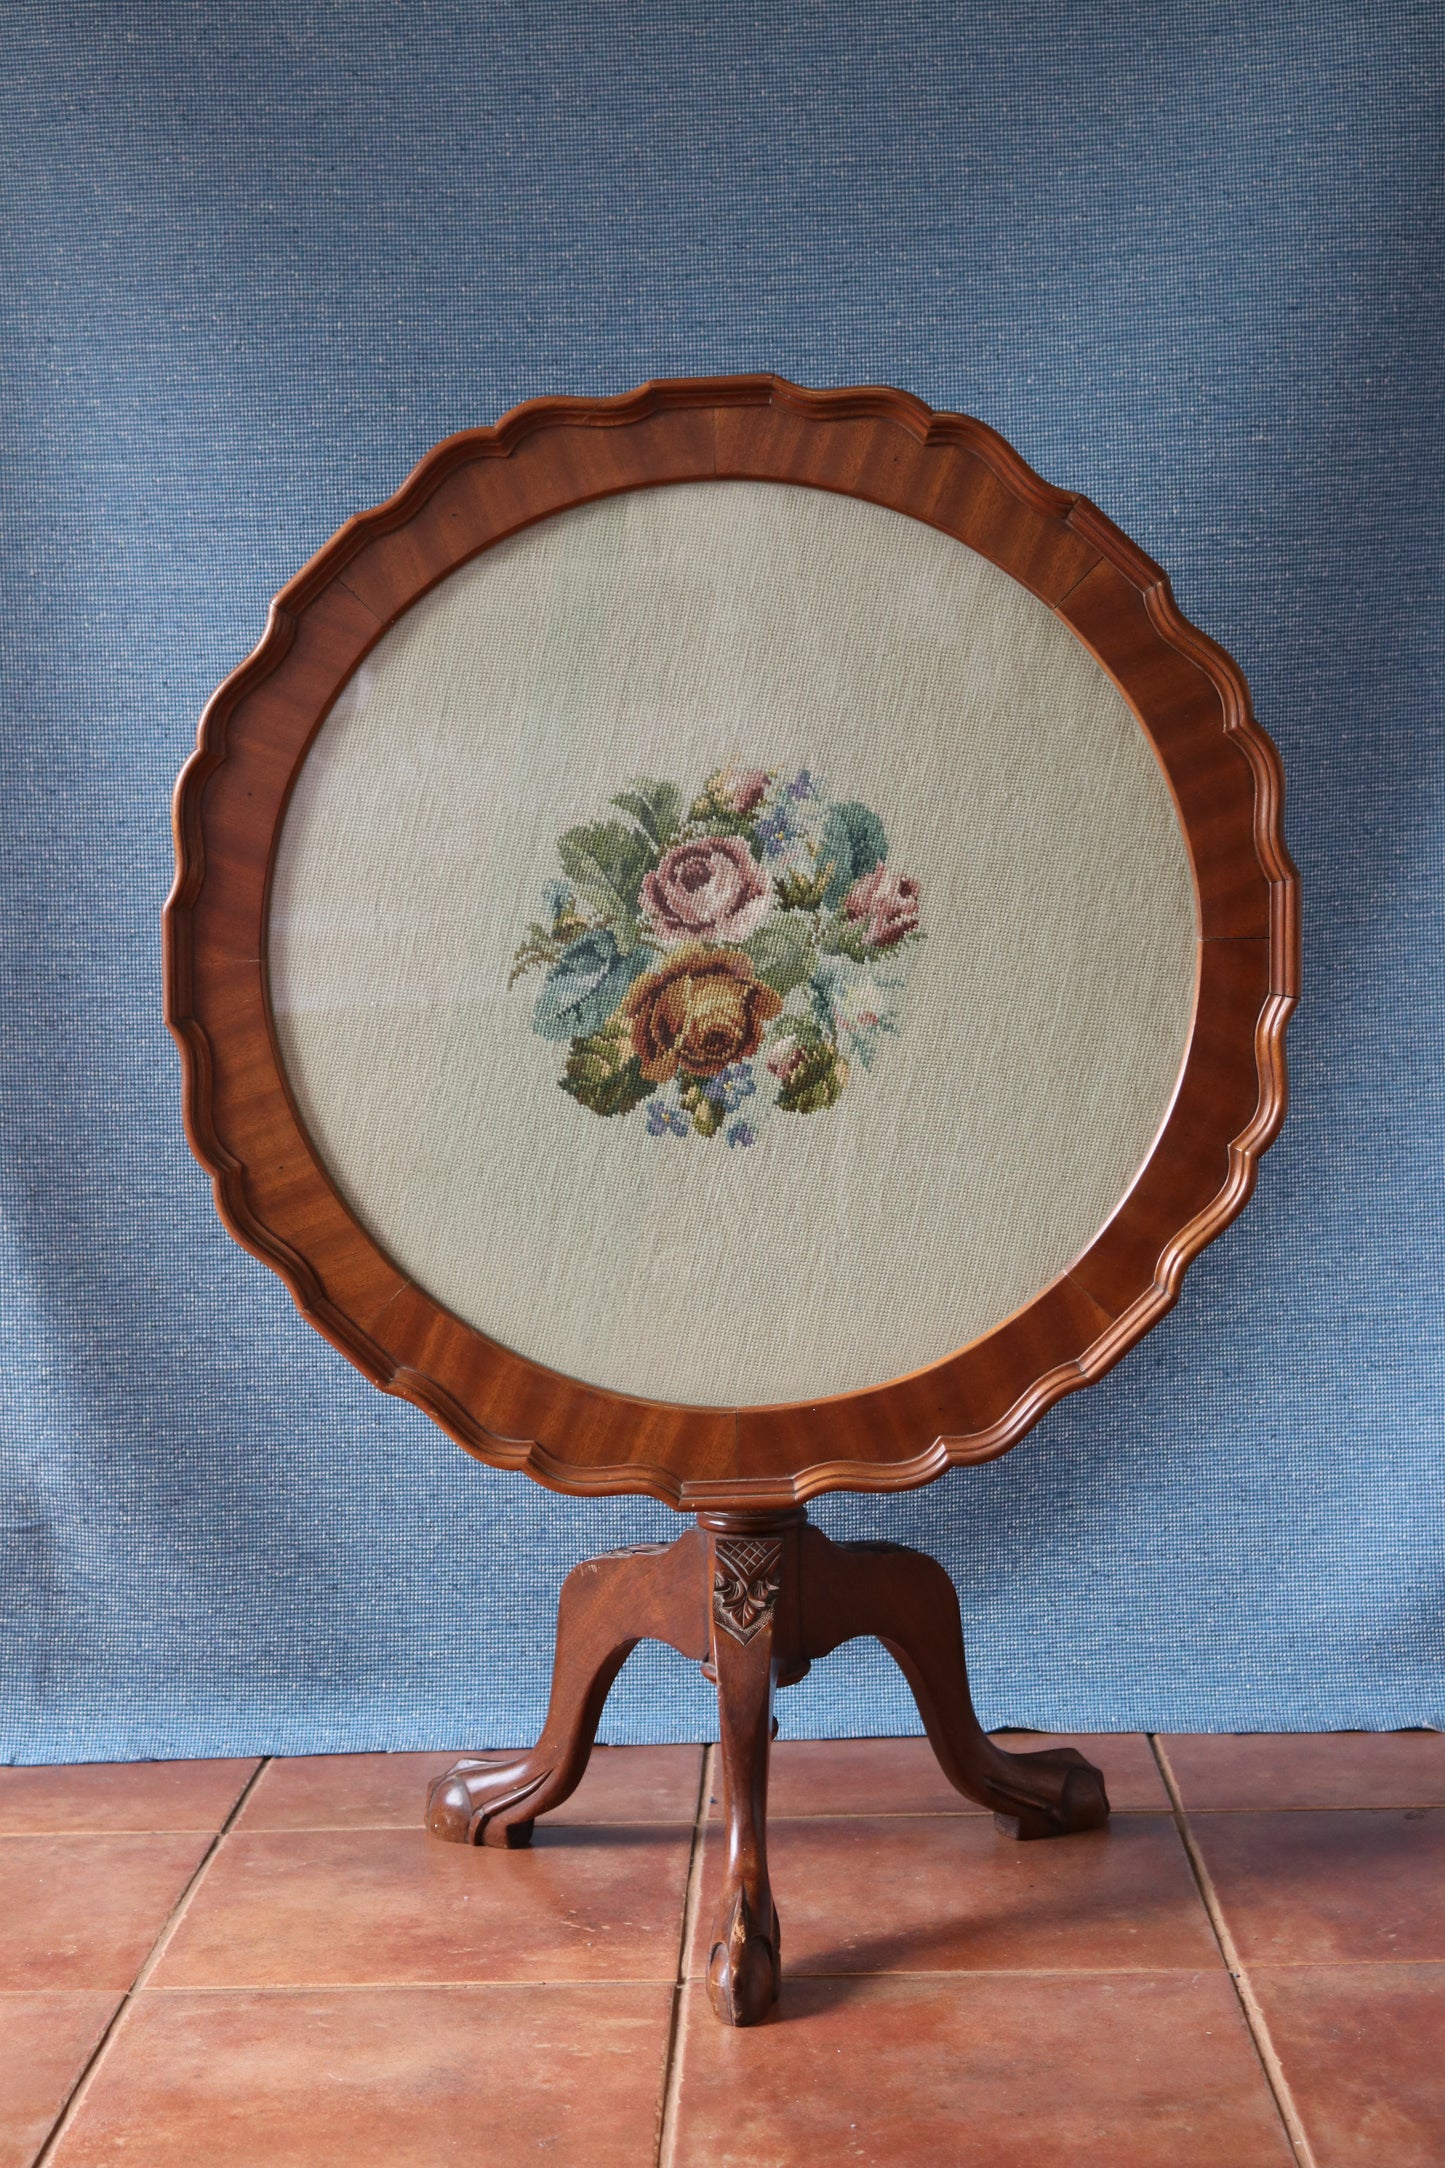 Tilt-top Table With Needlepoint Floral Motif